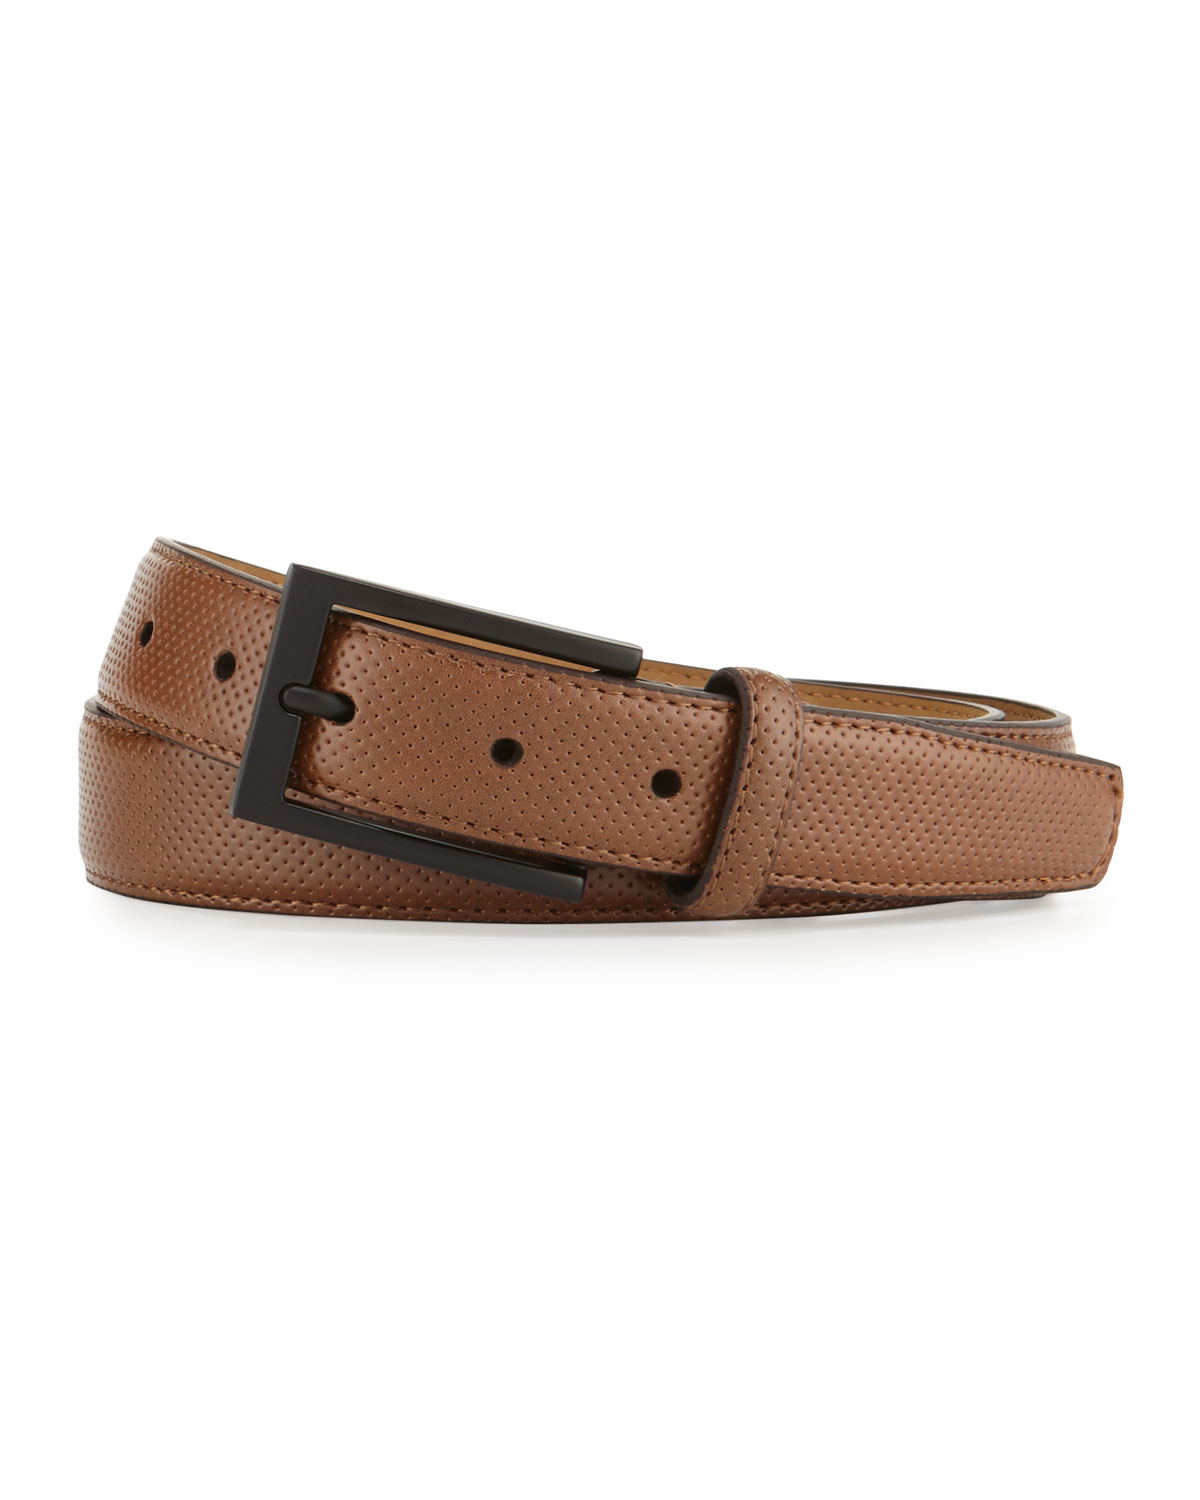 Neiman marcus Leather Pin-dot Belt in Brown for Men | Lyst